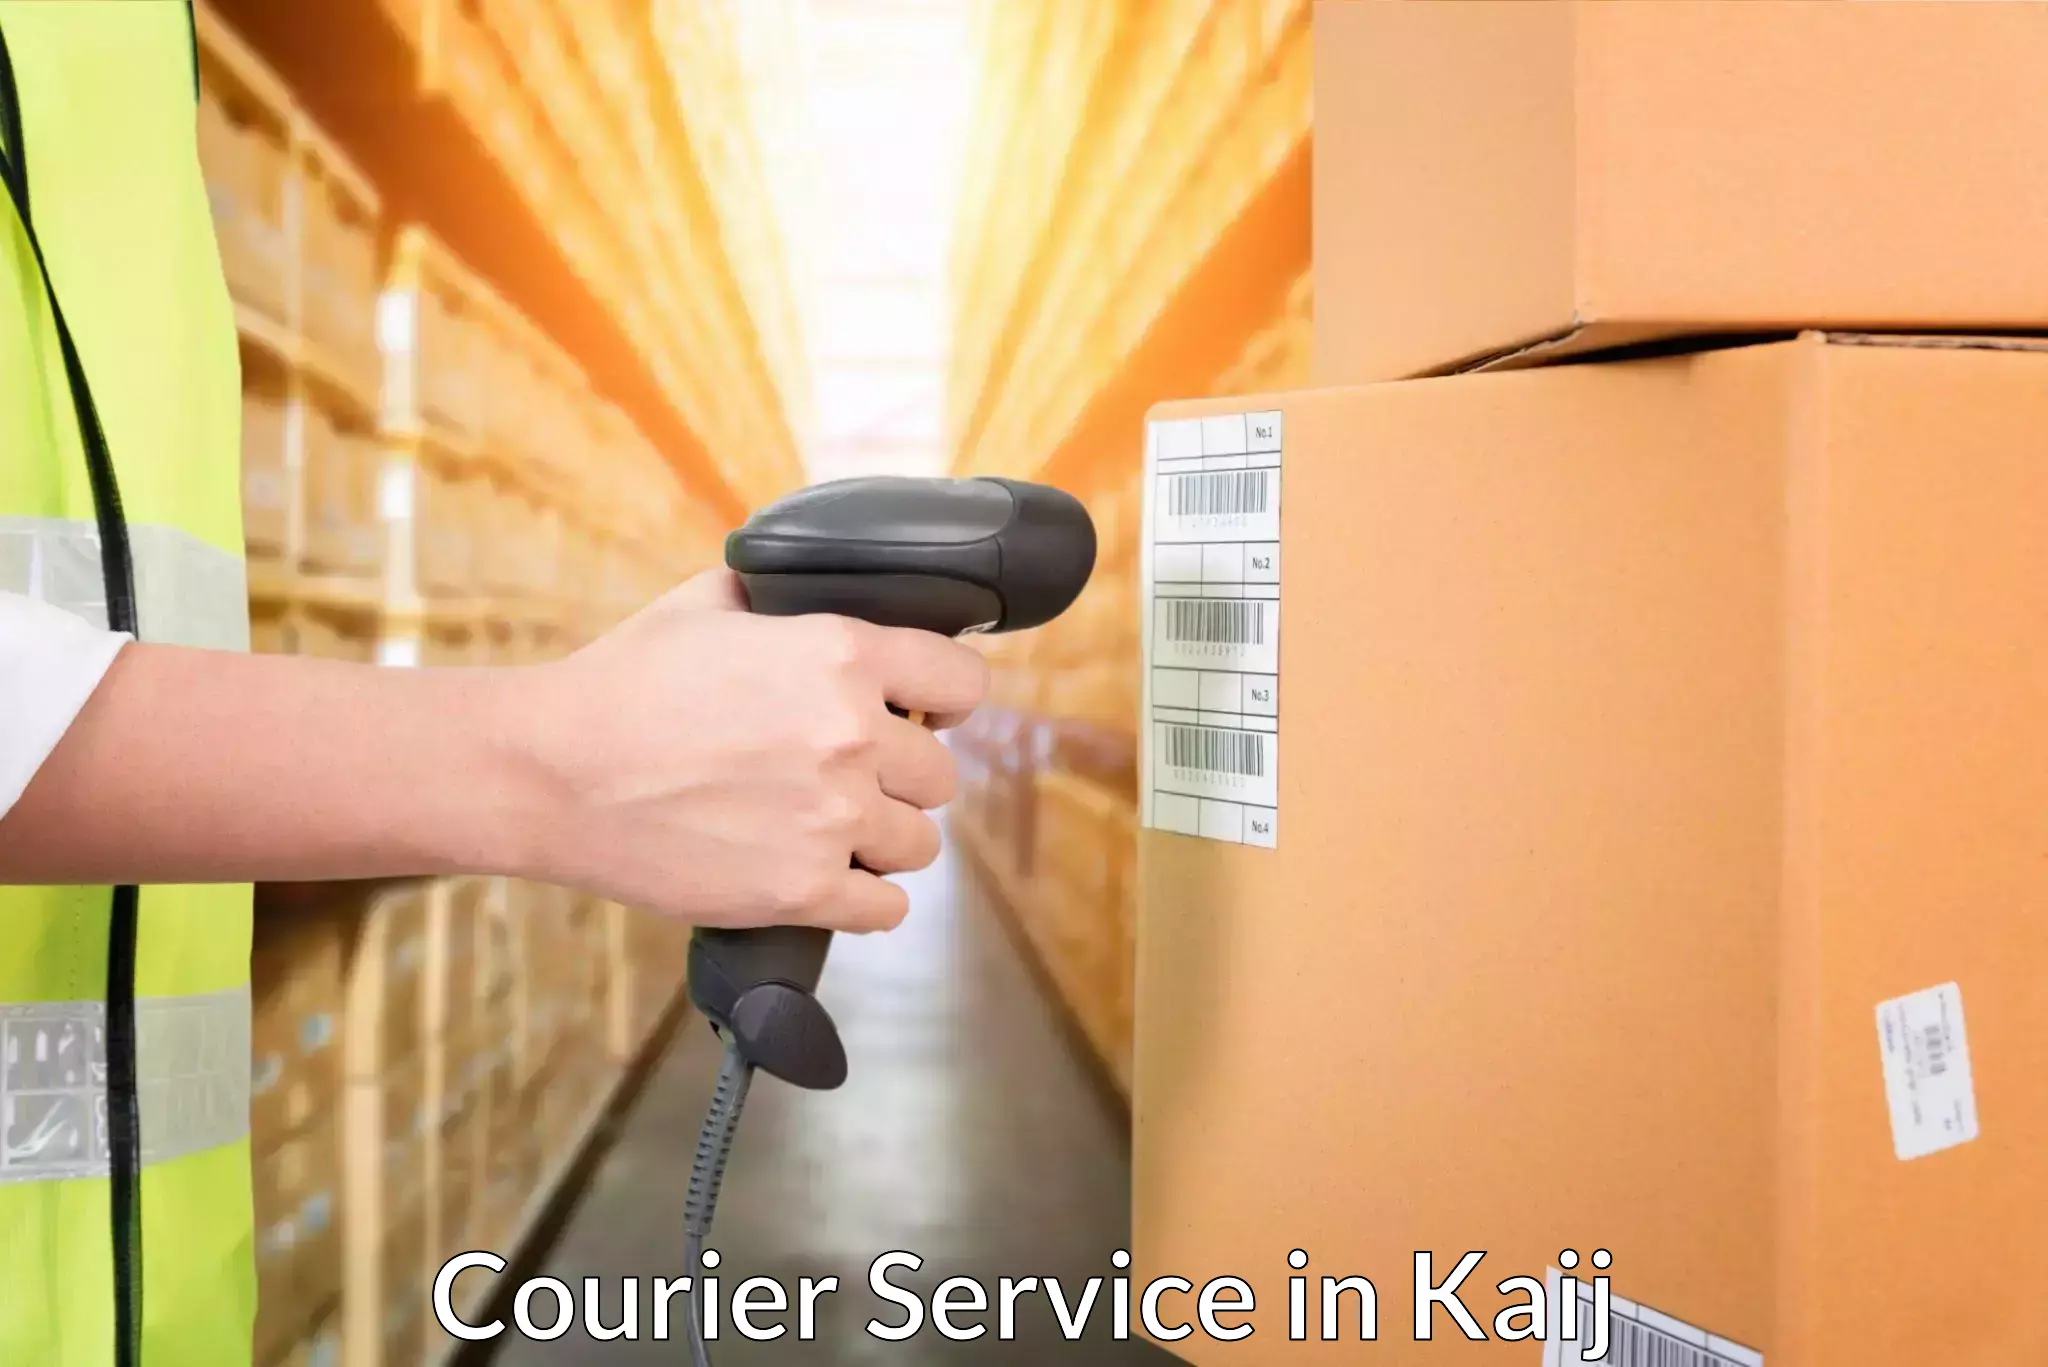 24-hour courier service in Kaij